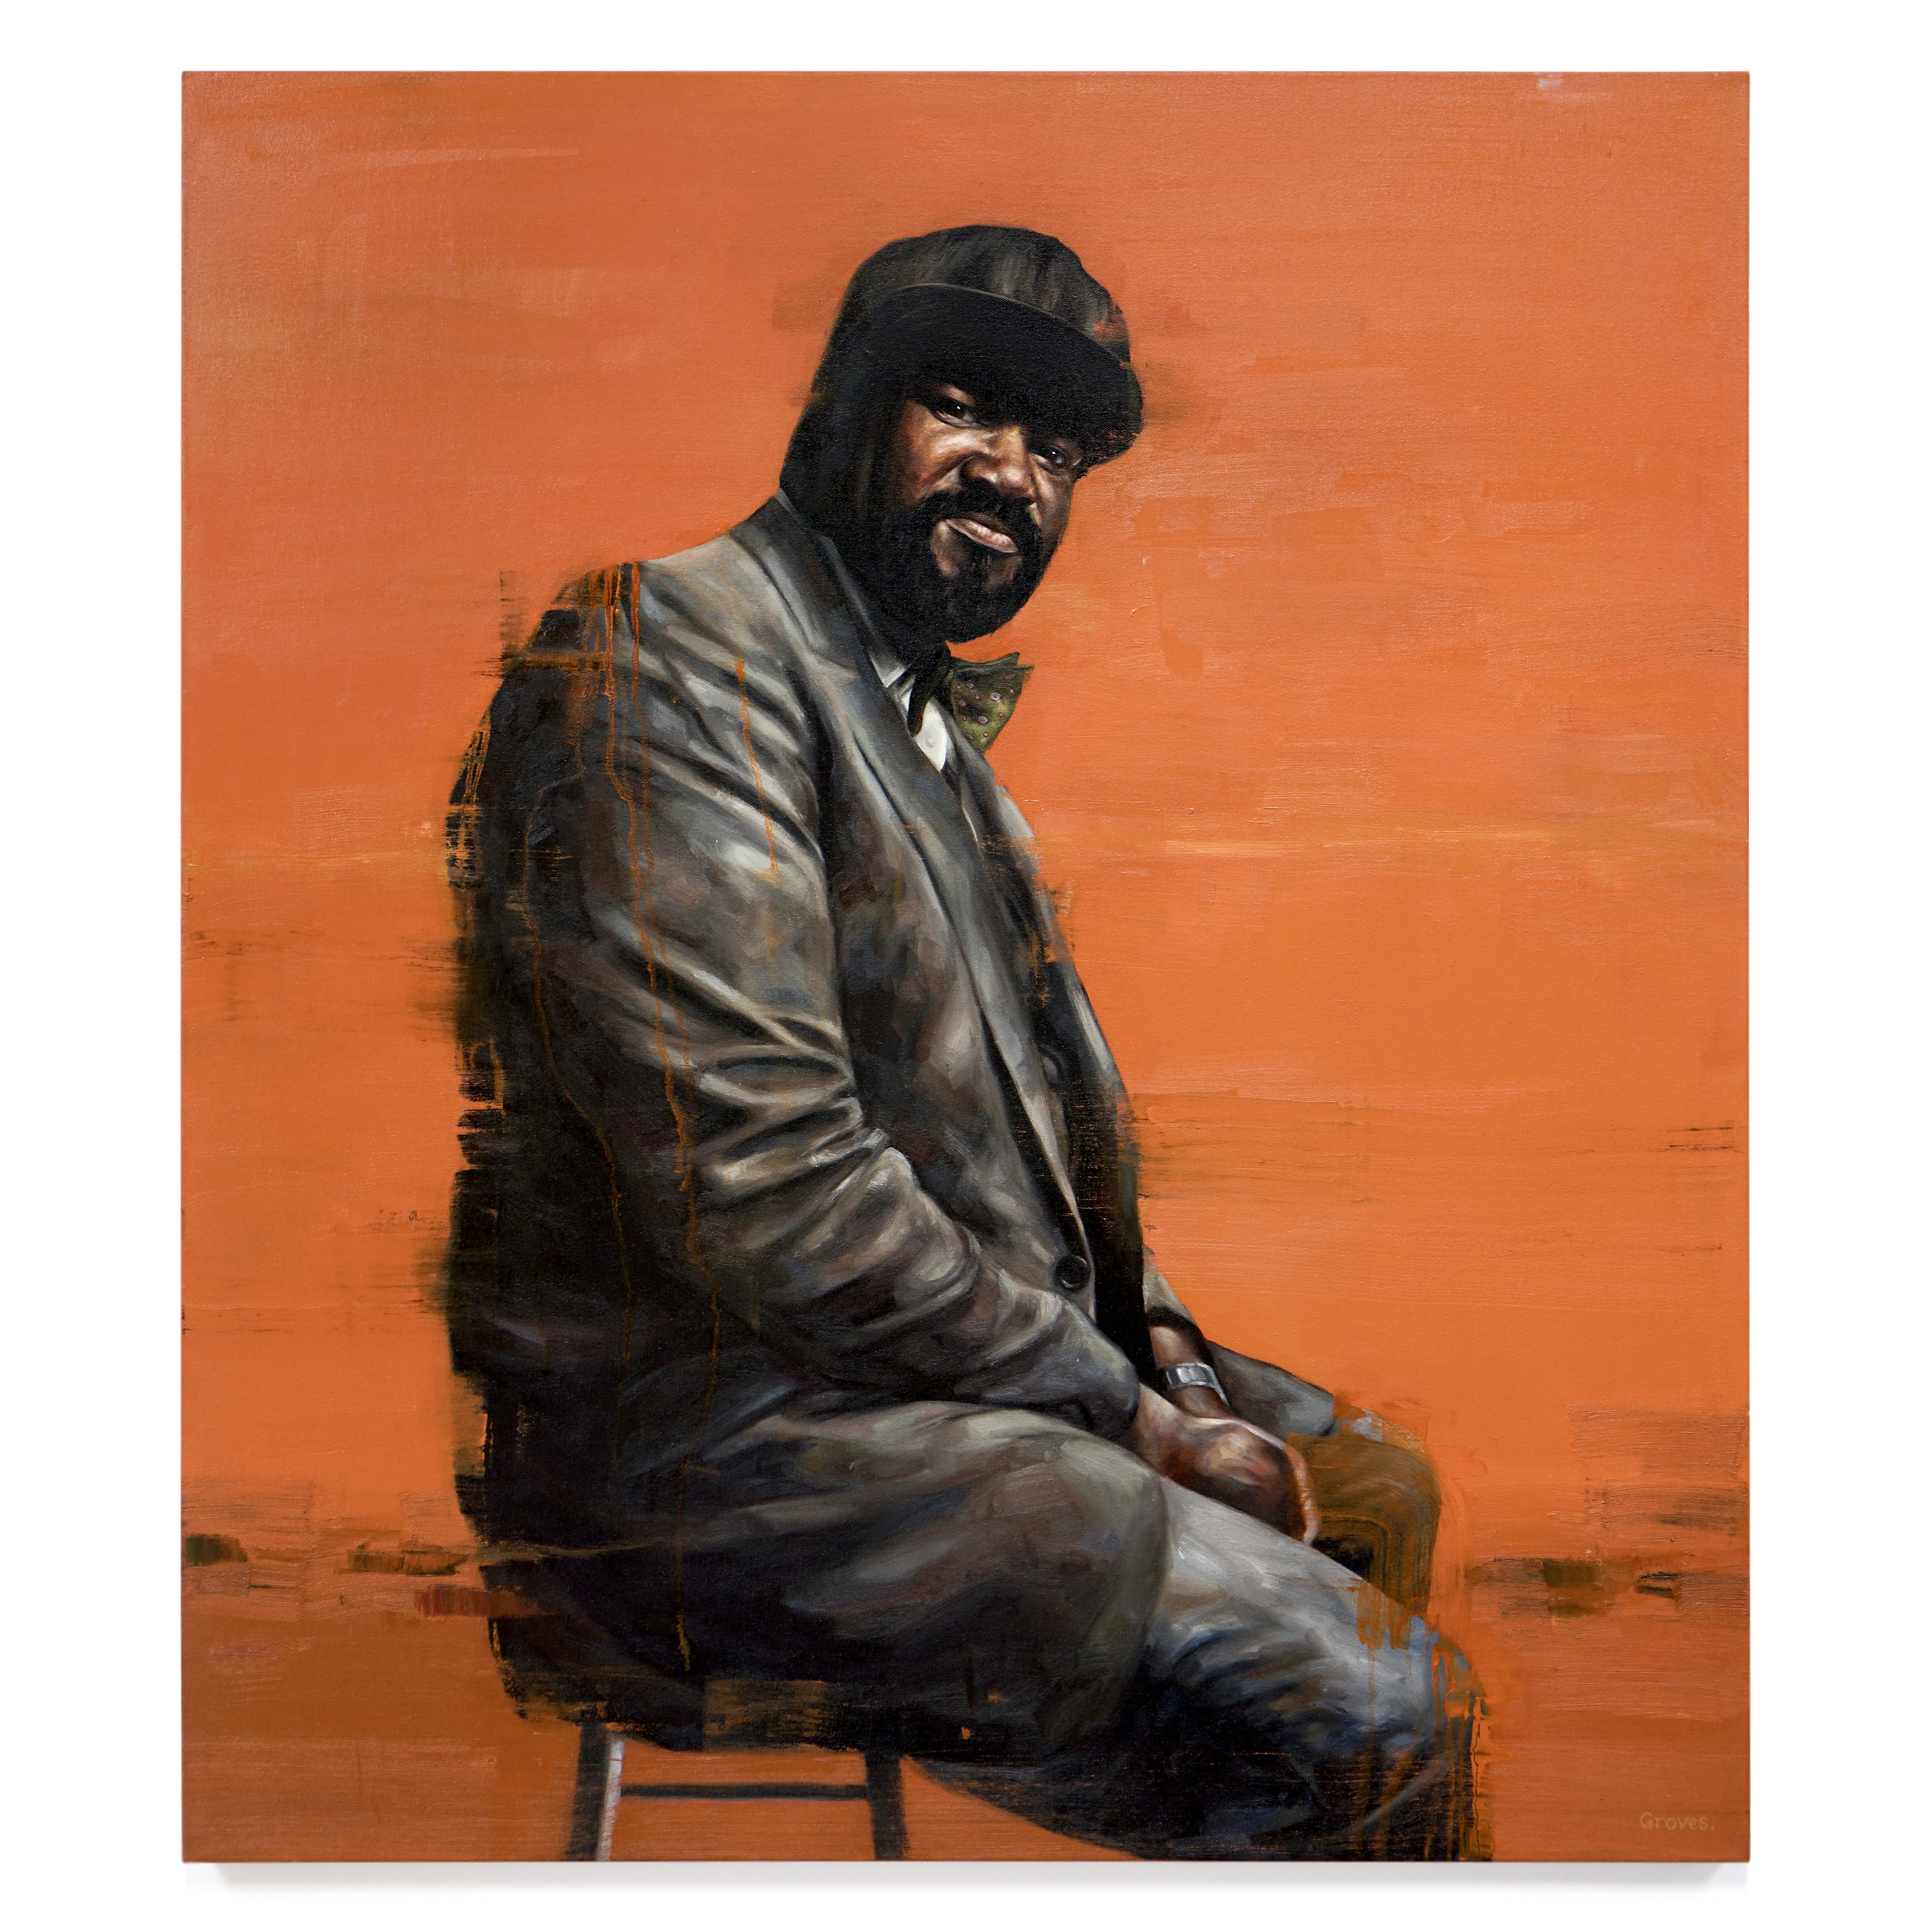 Gregory Porter's Portrait by George Groves